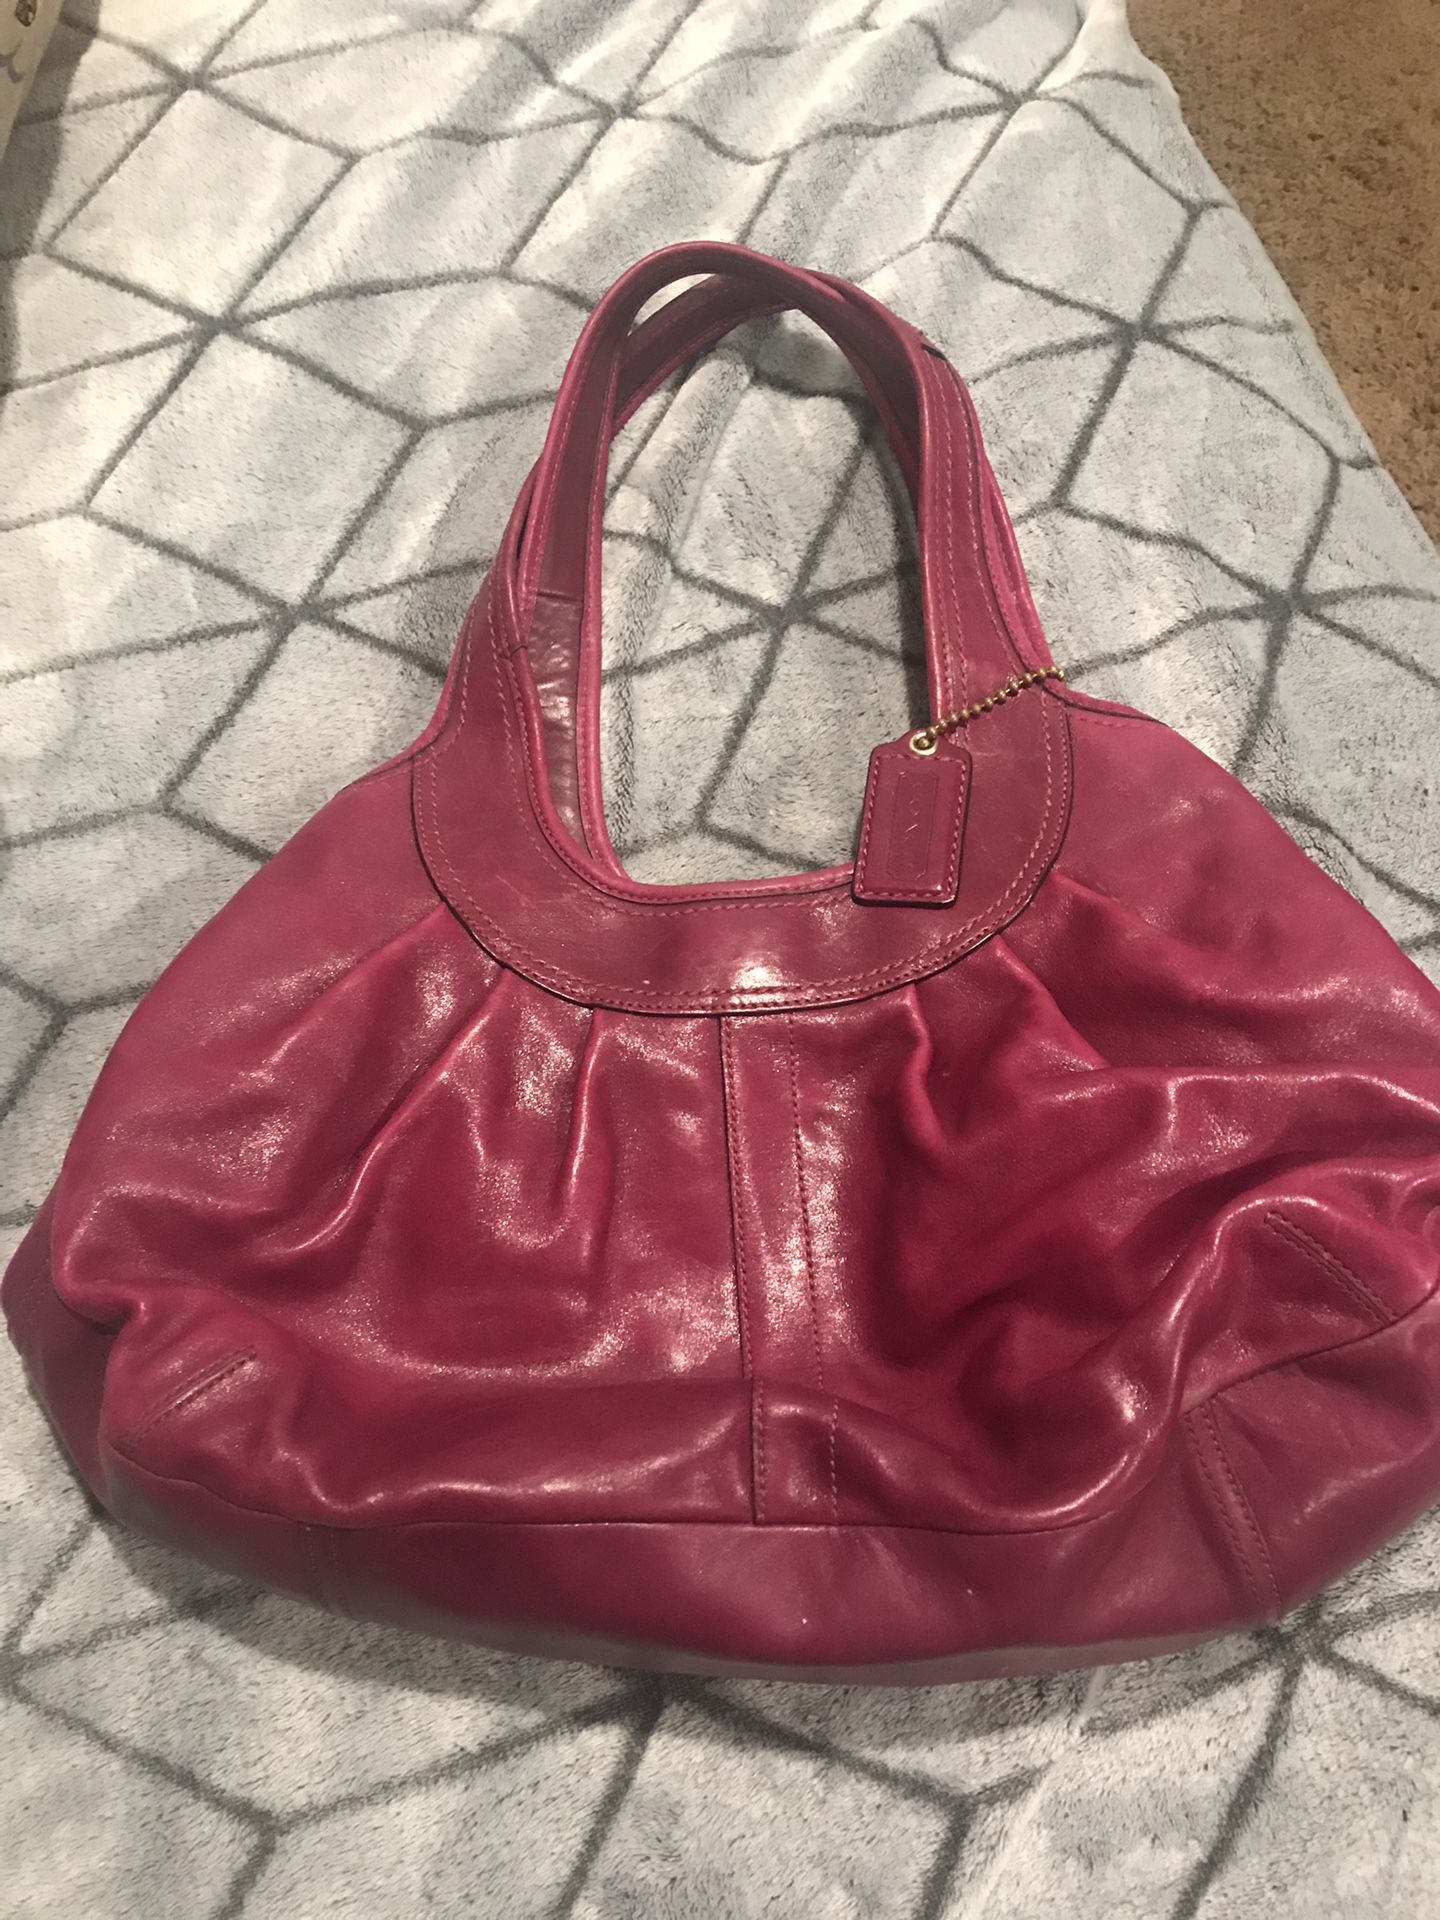 Hot Pink Leather Coach Purse AUTHENTIC